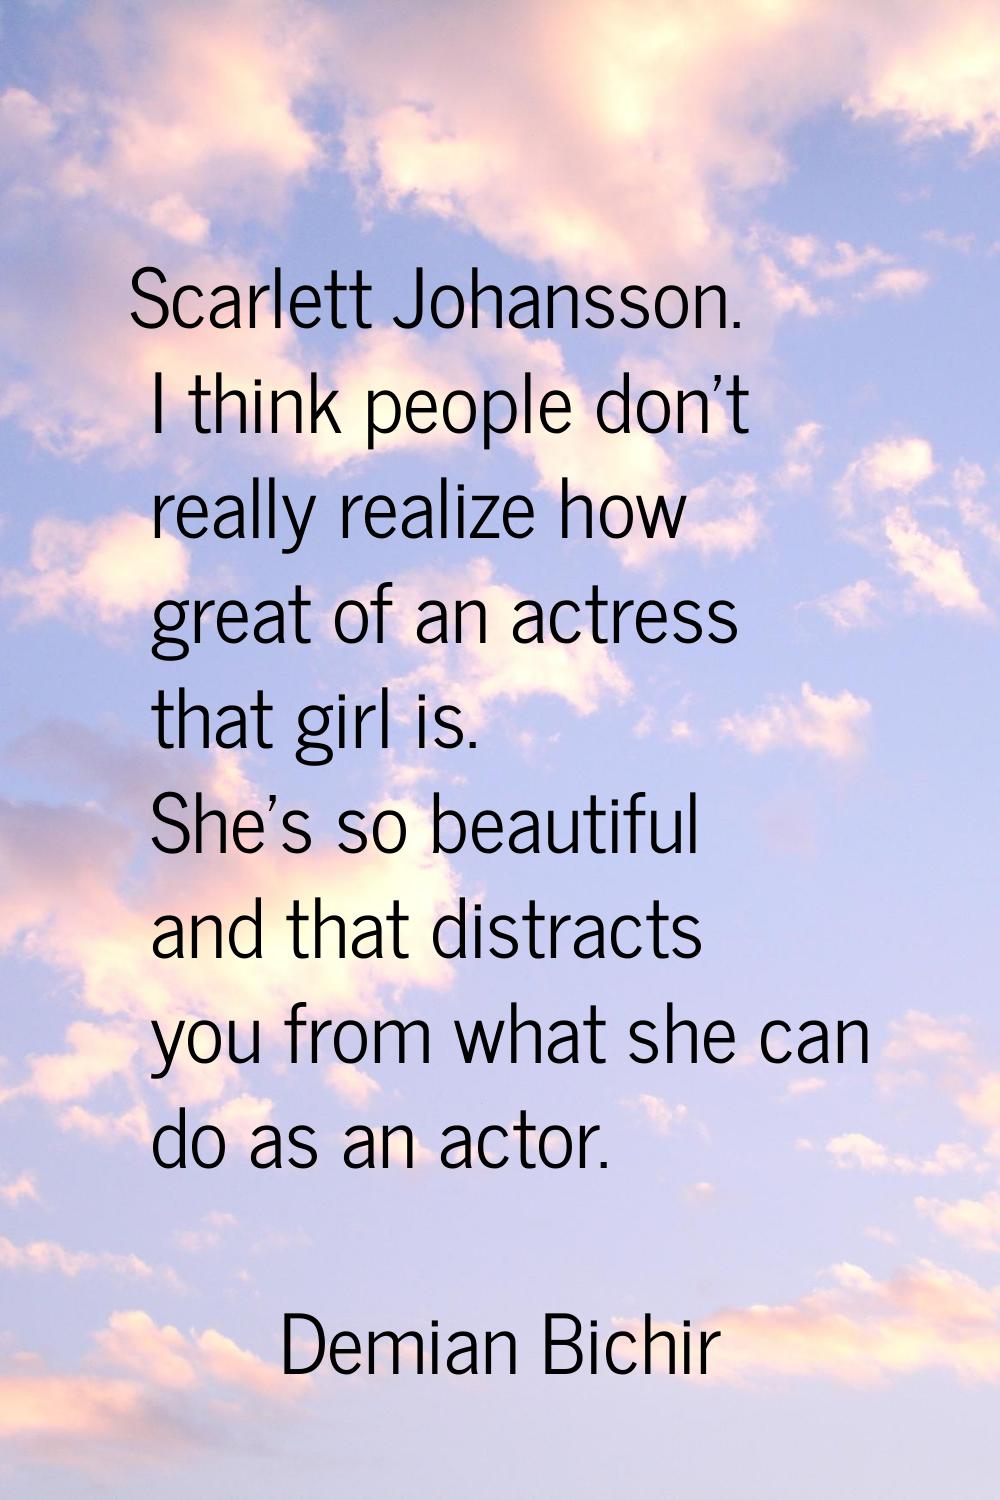 Scarlett Johansson. I think people don't really realize how great of an actress that girl is. She's